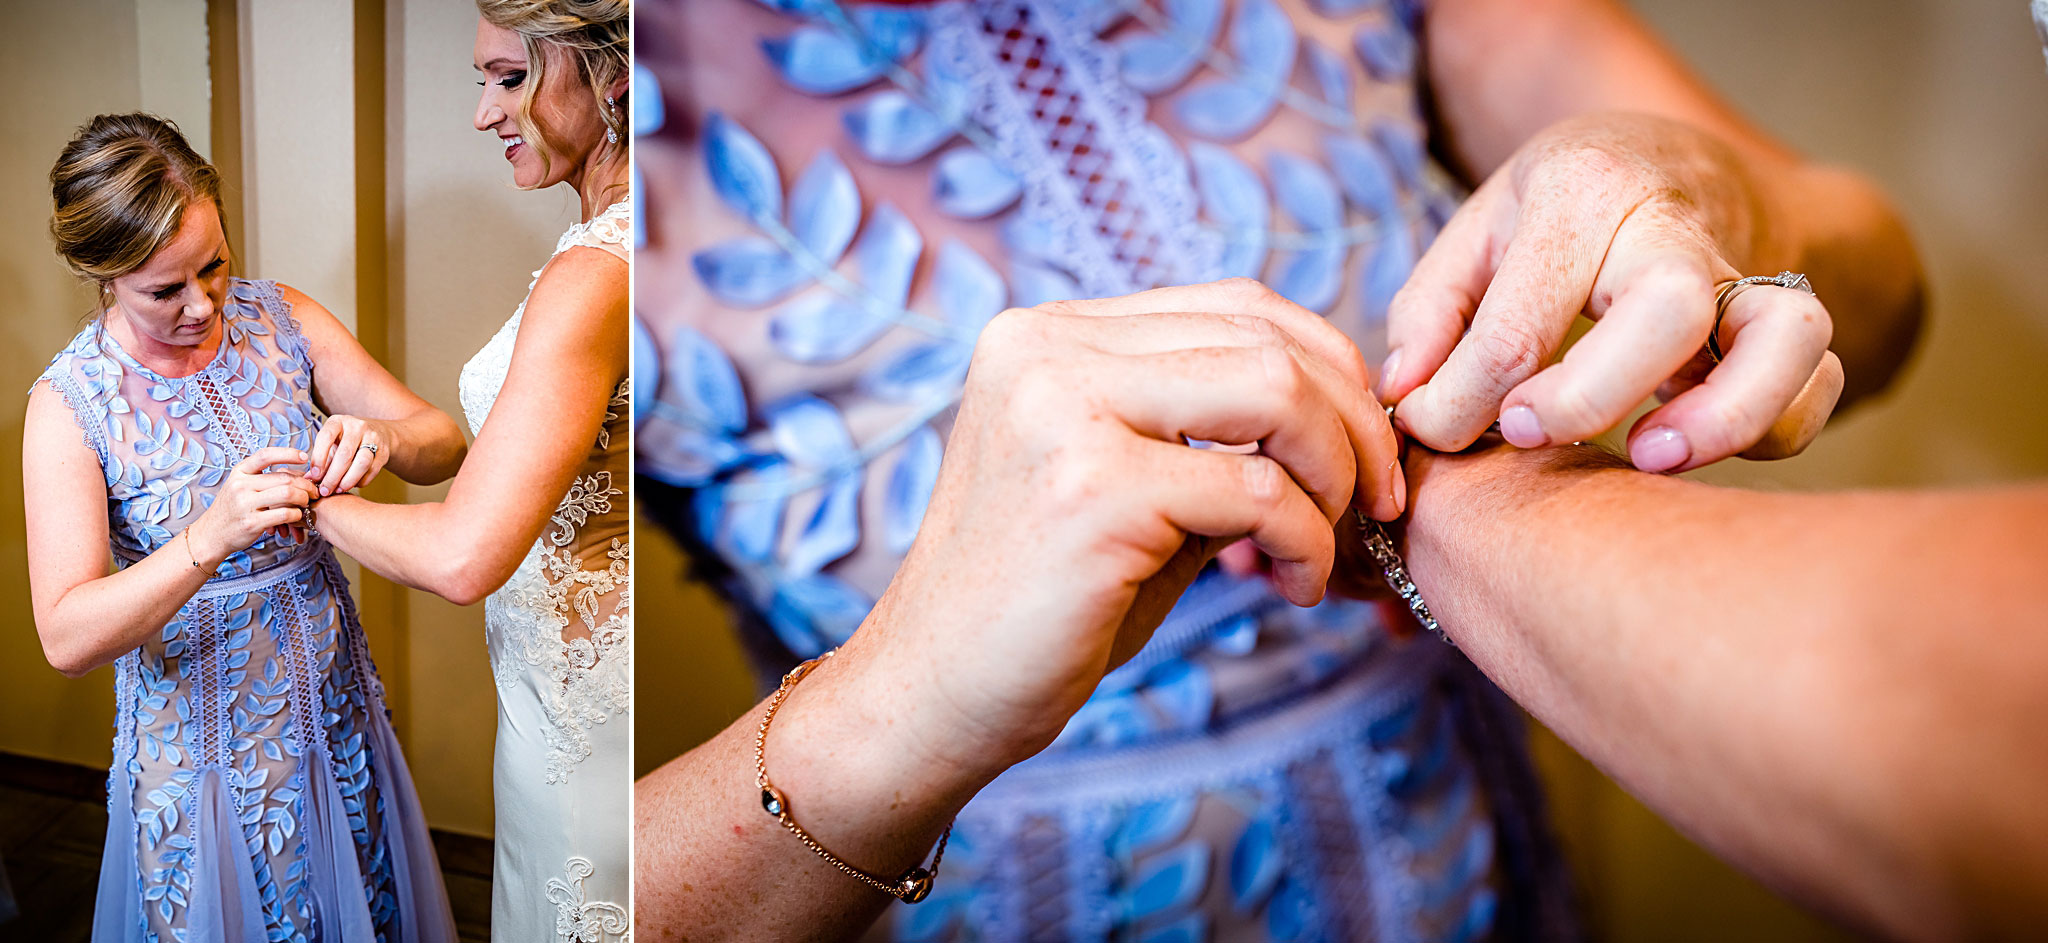 Maid of Honor helping Bride putting on jewelry. Kelli & Jason's golf course wedding at The Ranch Country Club by Colorado Wedding Photographer Jennifer Garza, Small wedding ideas, Intimate wedding, Golf Course Wedding, Country Club Wedding, Summer Wedding, Golf Wedding, Wedding planning, Colorado Wedding Photographer, Colorado Elopement Photographer, Colorado Elopement, Colorado Wedding, Denver Wedding Photographer, Denver Wedding, Wedding Inspiration, Summer Wedding Inspiration, Colorado Bride